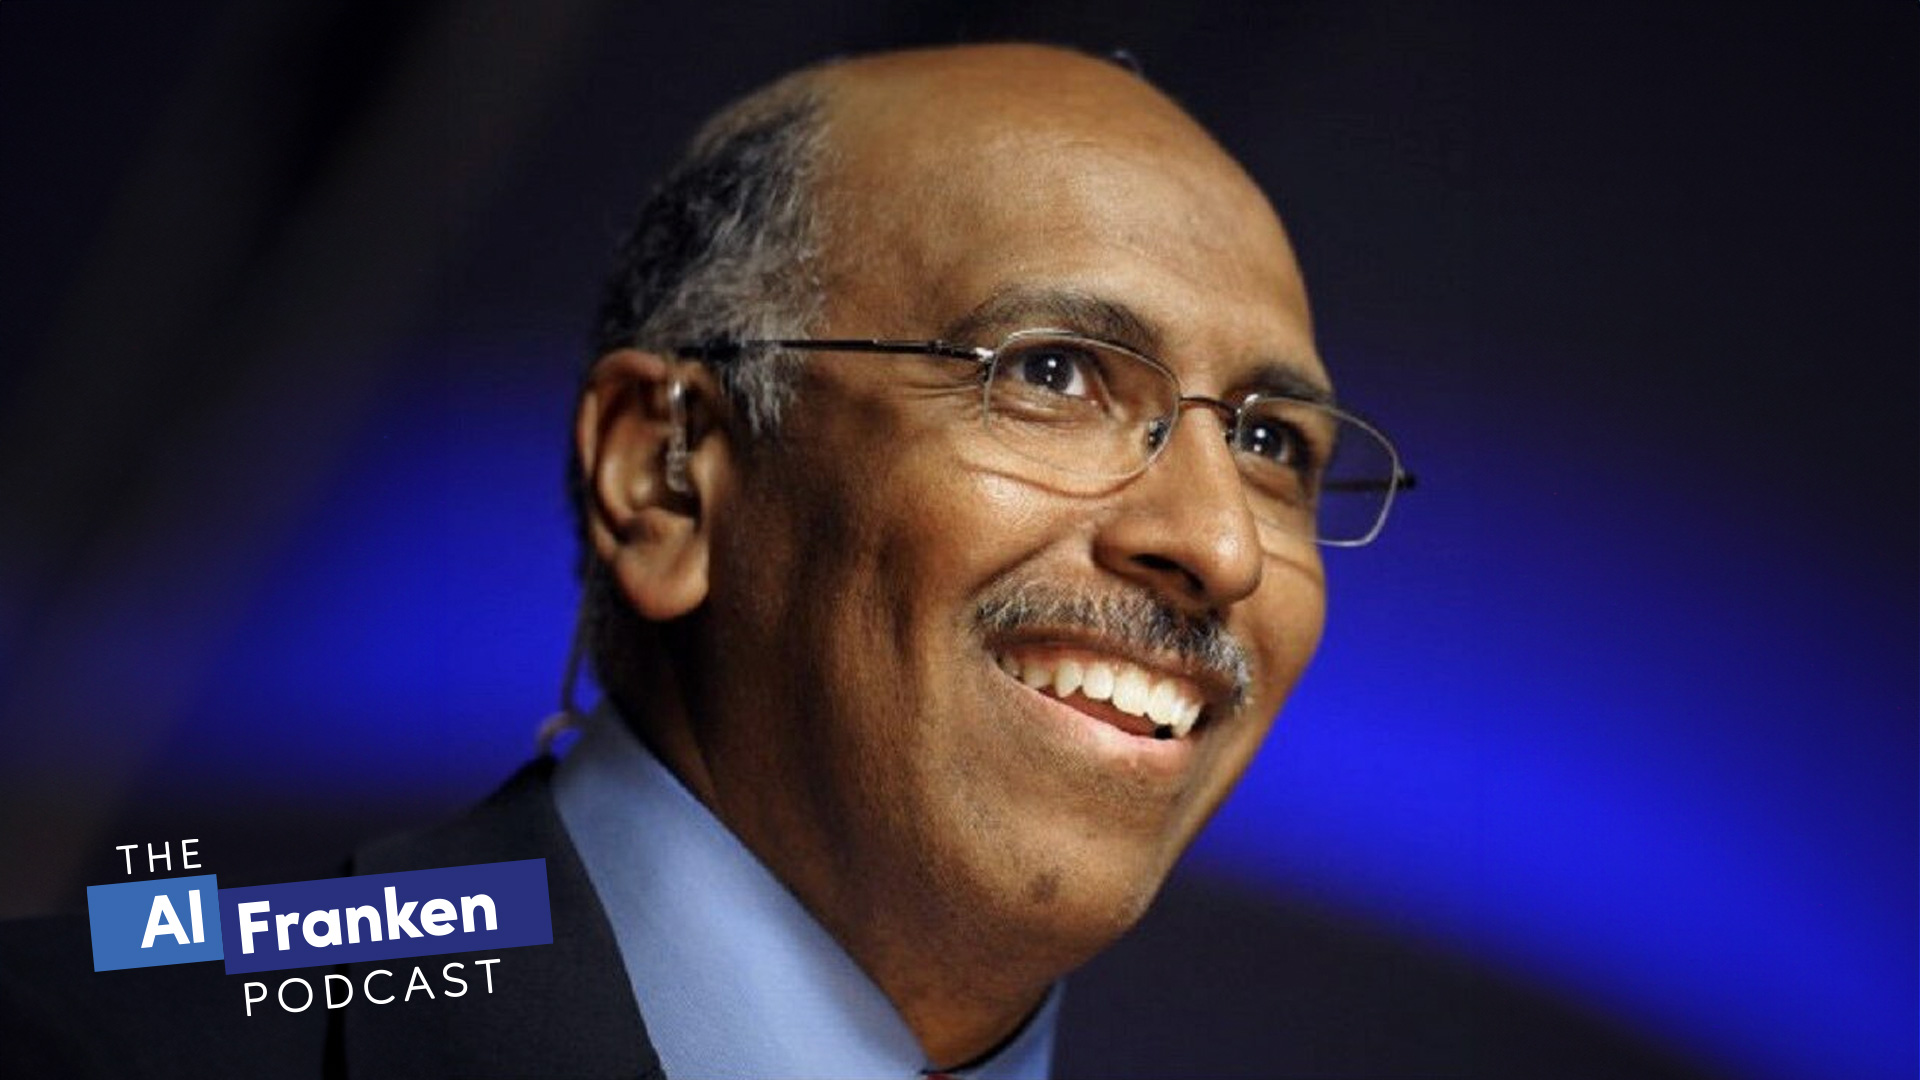 MICHAEL STEELE joins me on the podcast. Here Michael asks: Do Republicans want extremism?